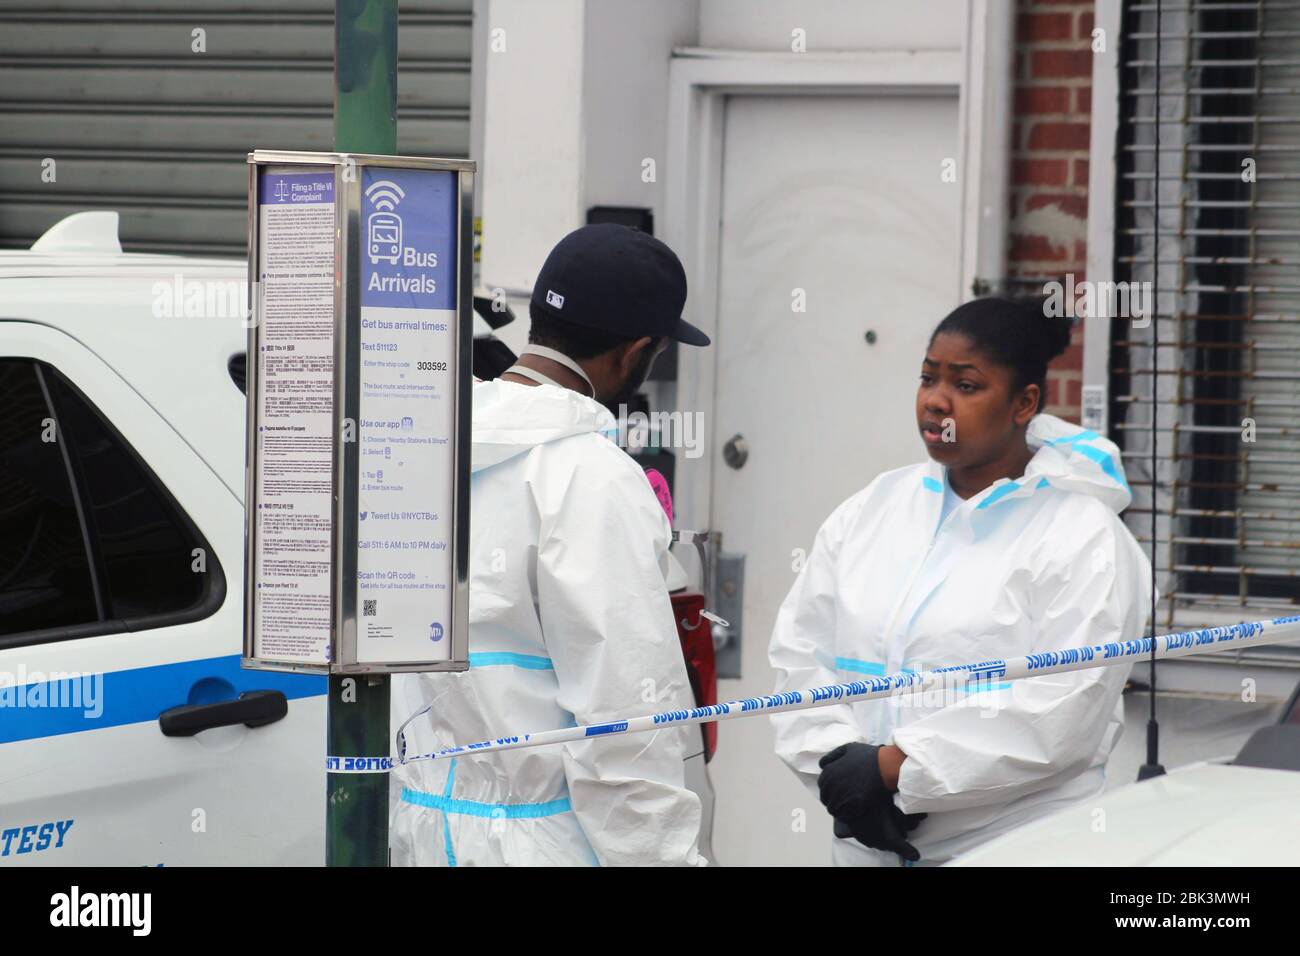 New York, New York, USA. 30th Apr, 2020. Two workers talk, both wearing a hazmat, next to the Andrew T. Cleckley Funeral Home in Brooklyn where bodies that weren't properly cared have been removed. 60 corpses were stored in 4 non-refregerated trucks lining the street along the stores. New York authorities showed up after neighbors reported a foul smell and fluids dripping from the trucks. Some bodies were also found lying on the facilityÃ¢â‚¬â„¢s floor. Credit: Marie Le Ble/ZUMA Wire/Alamy Live News Stock Photo